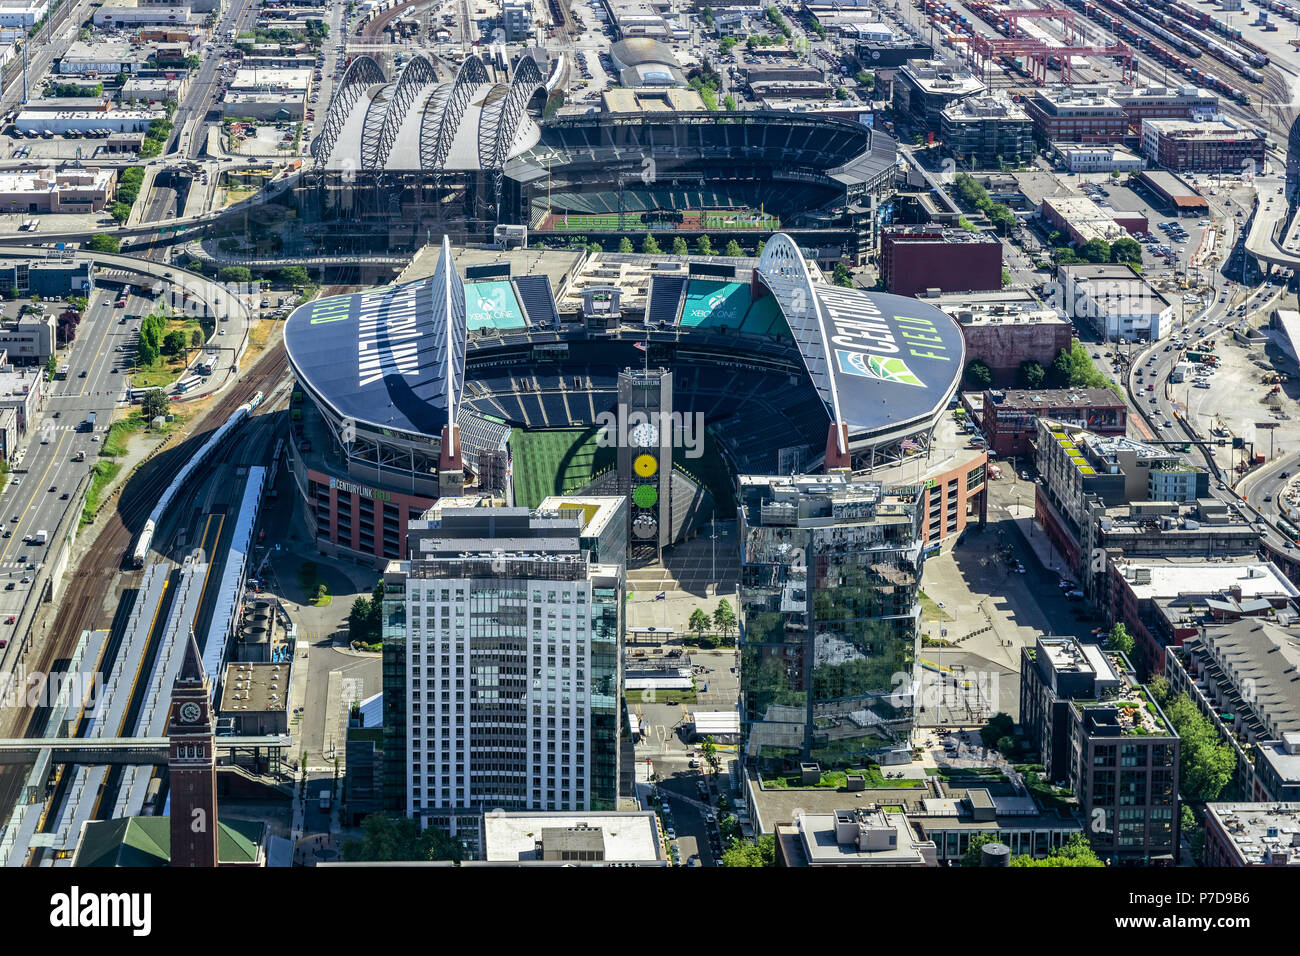 SEATTLE, WASHINGTON STATE - MAY 31, 2018: Aerial view of the CenturyLink Field and the Safeco Field, the main stadiums of Seattle. Stock Photo